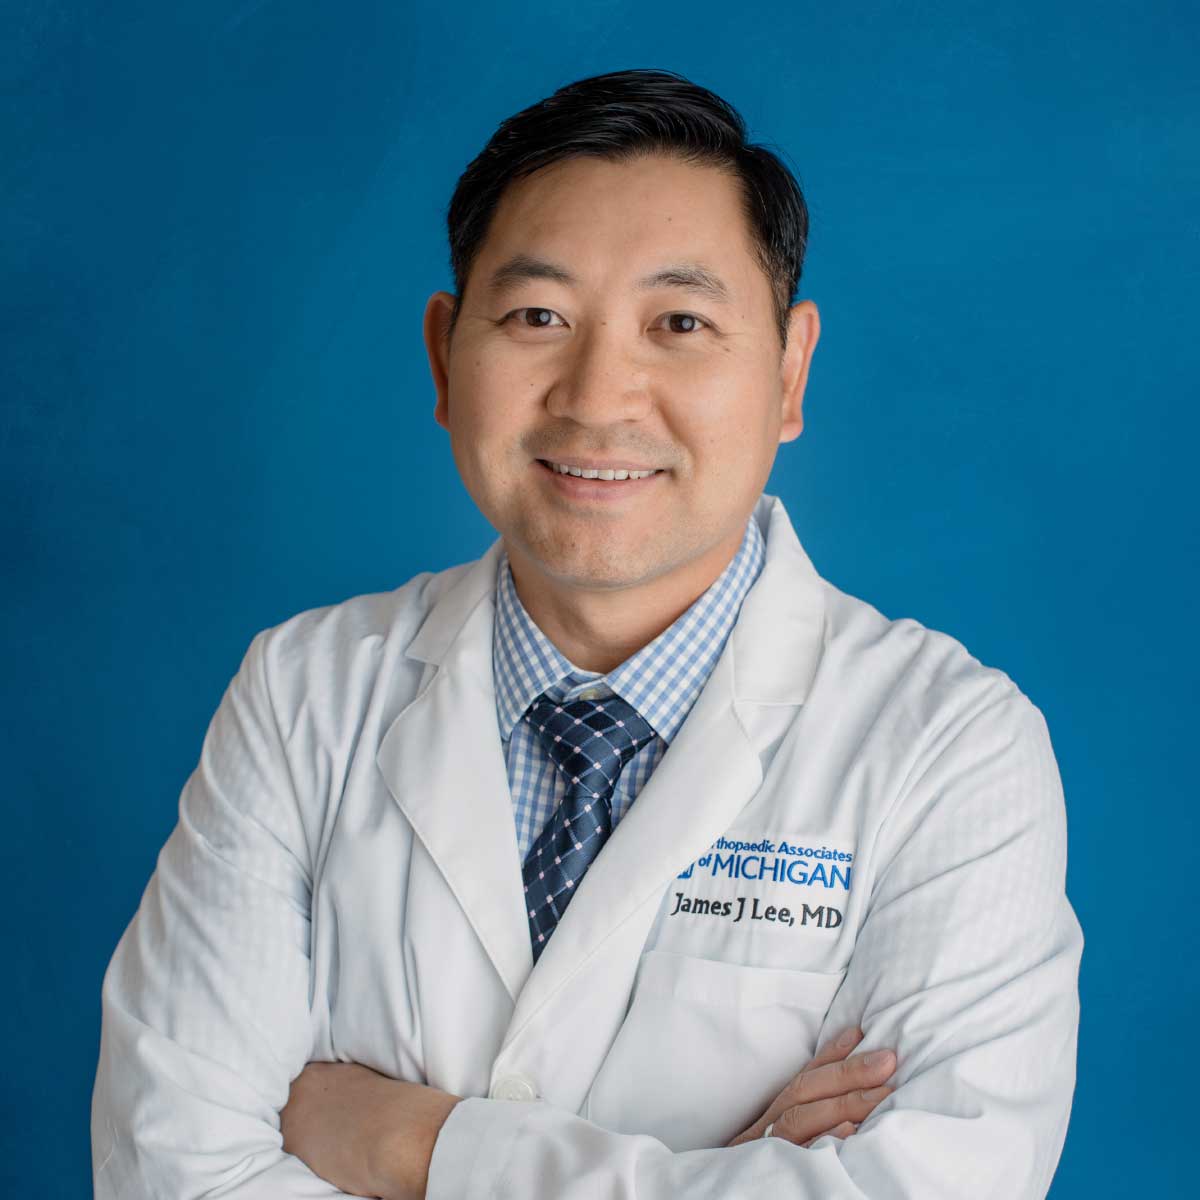 James J. Lee, MD - Orthopedic Physicians in Greater Grand Rapids, MI